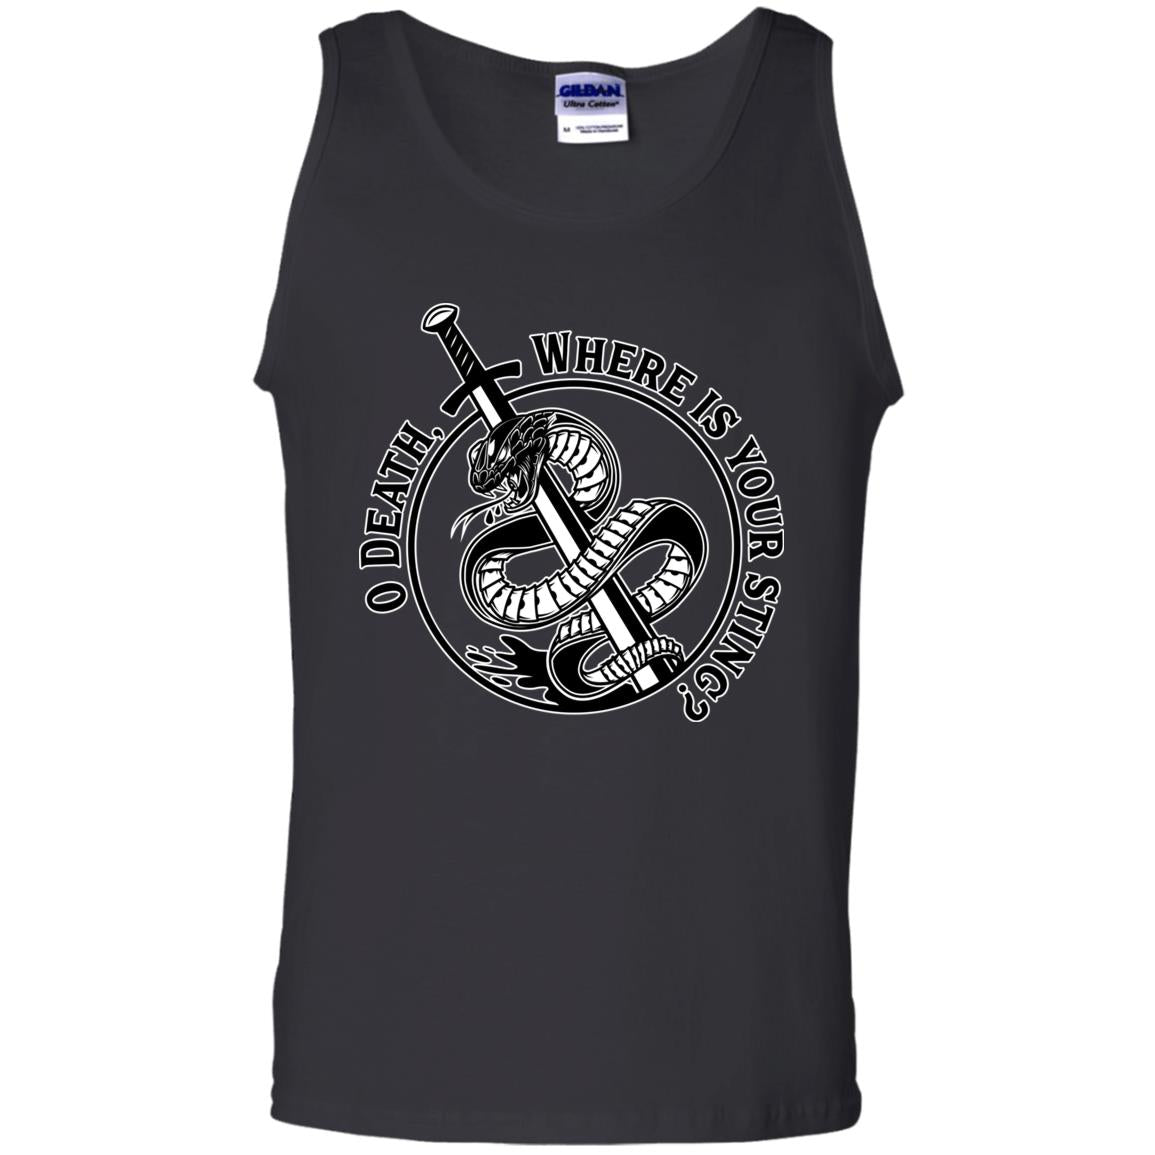 O Death, Where is Your Sting? (Mens & Womens Tank)